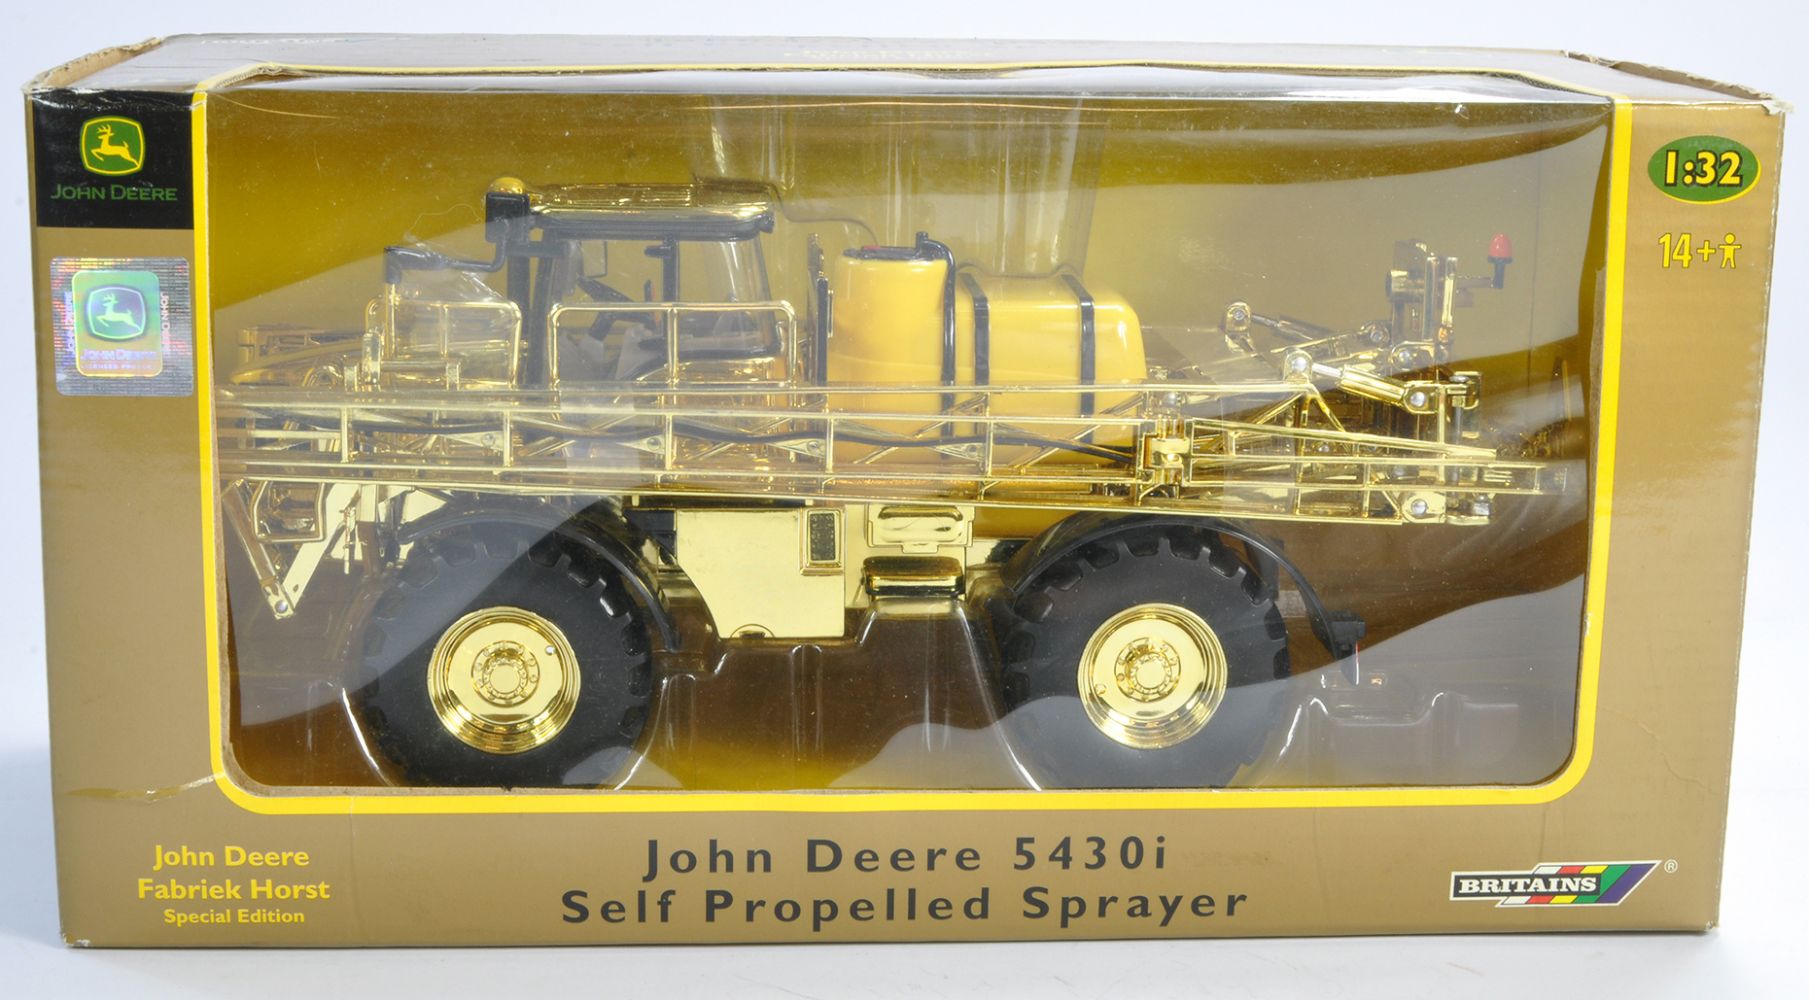 Farm, Truck and Construction Models featuring the Sterry John Deere Collection Part 1